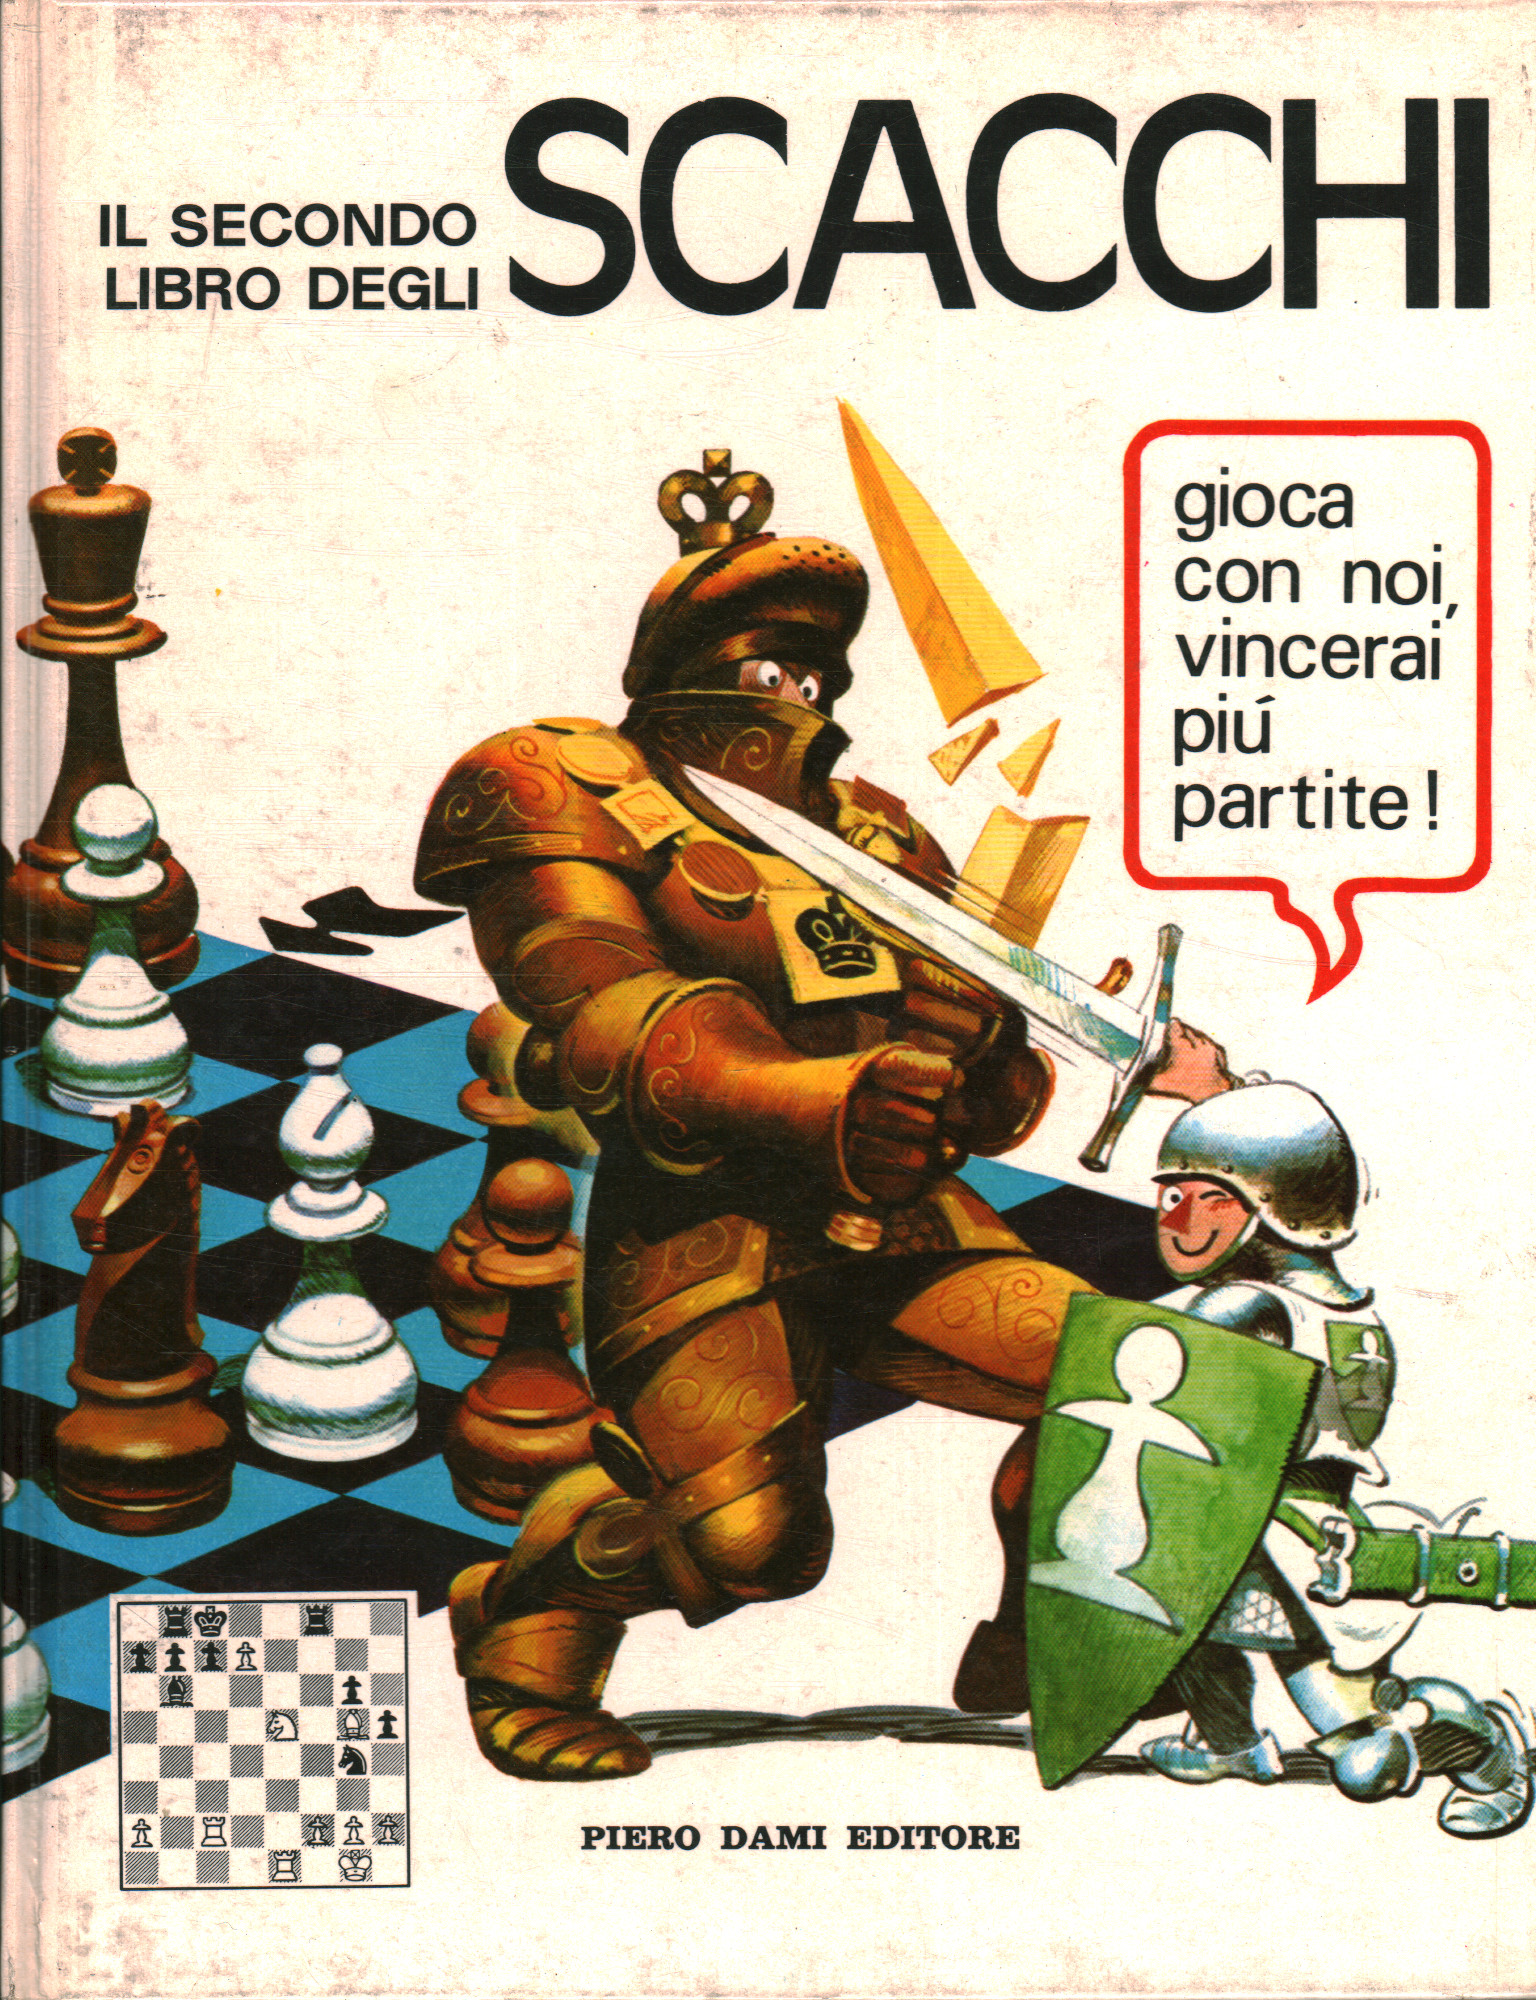 The second chess book